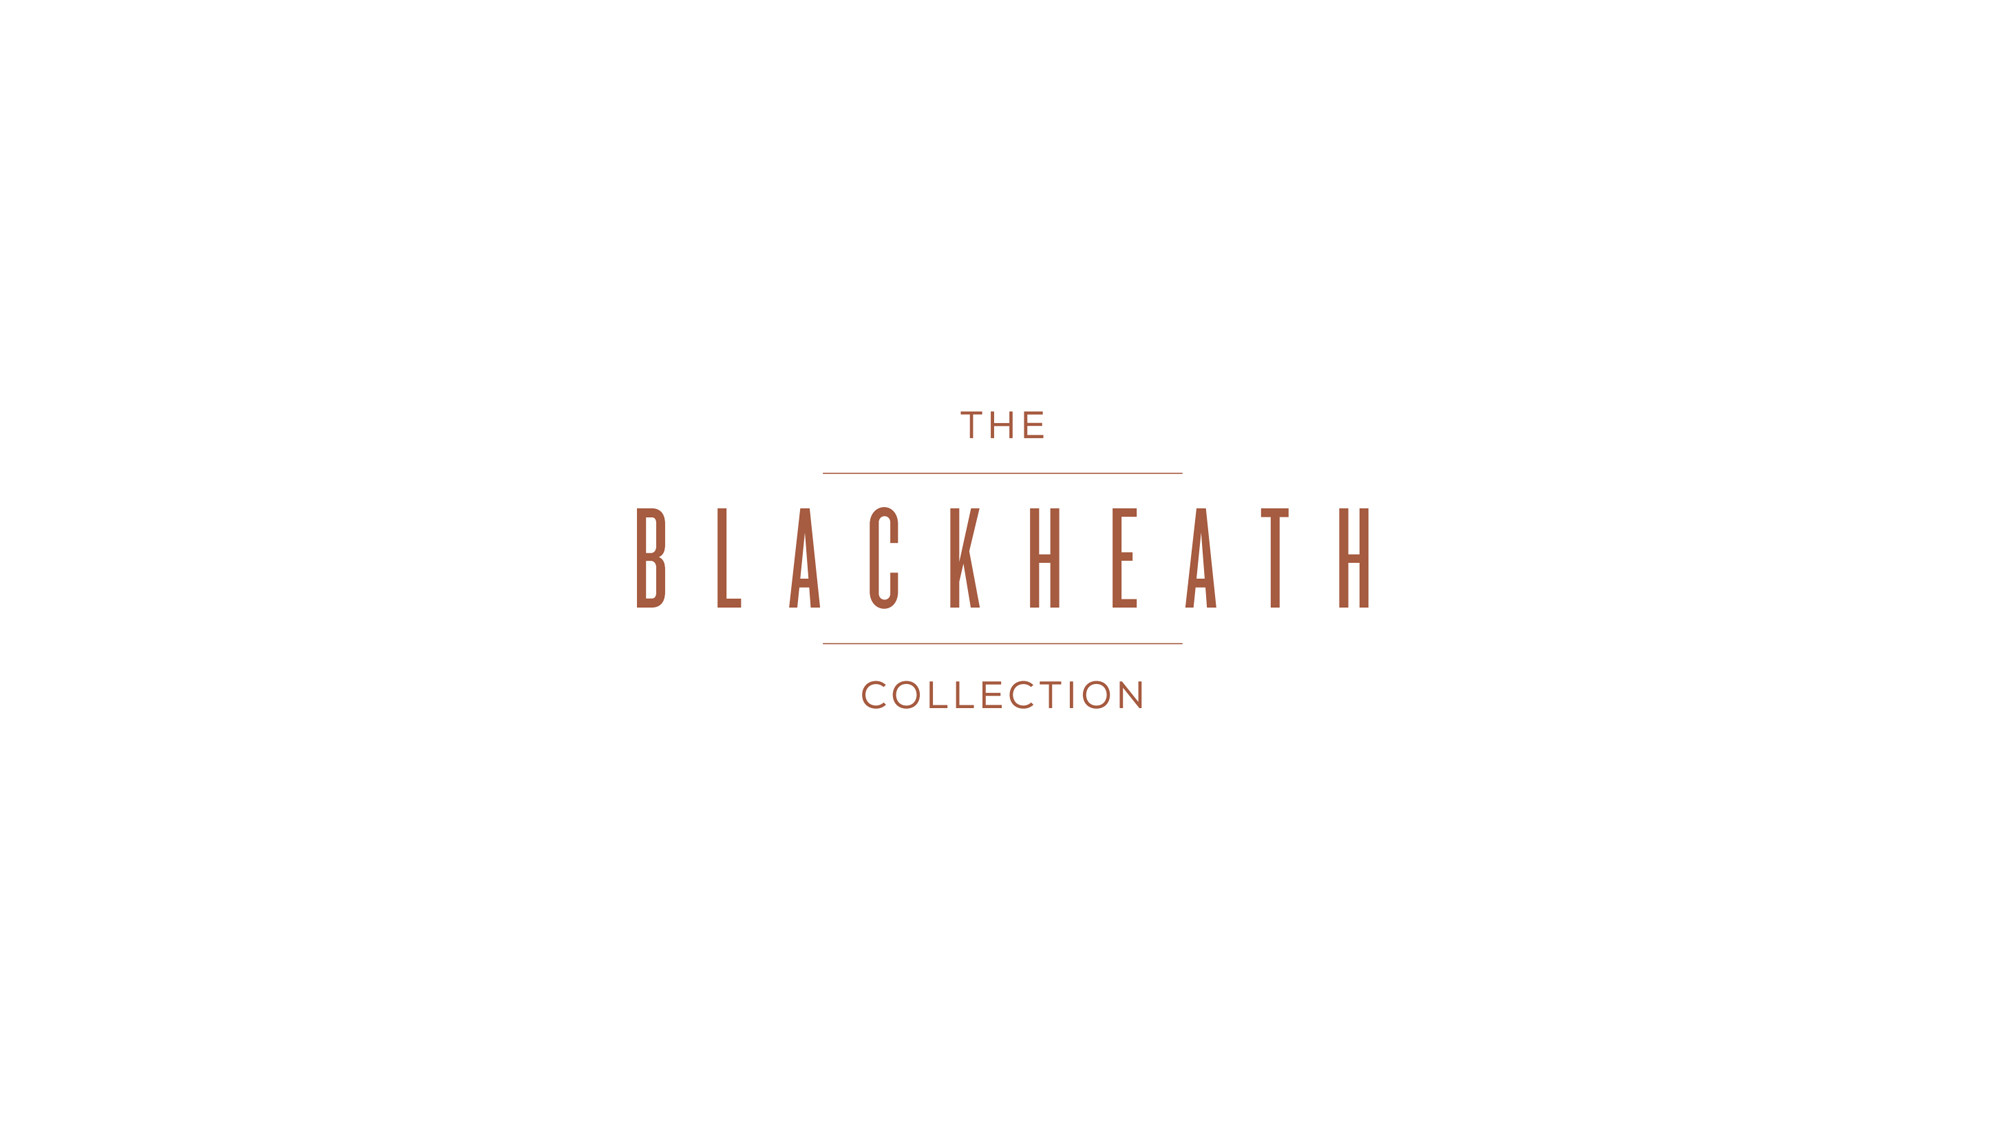 The Blackheath Collection at Kidbrooke Village launched in autumn 2021